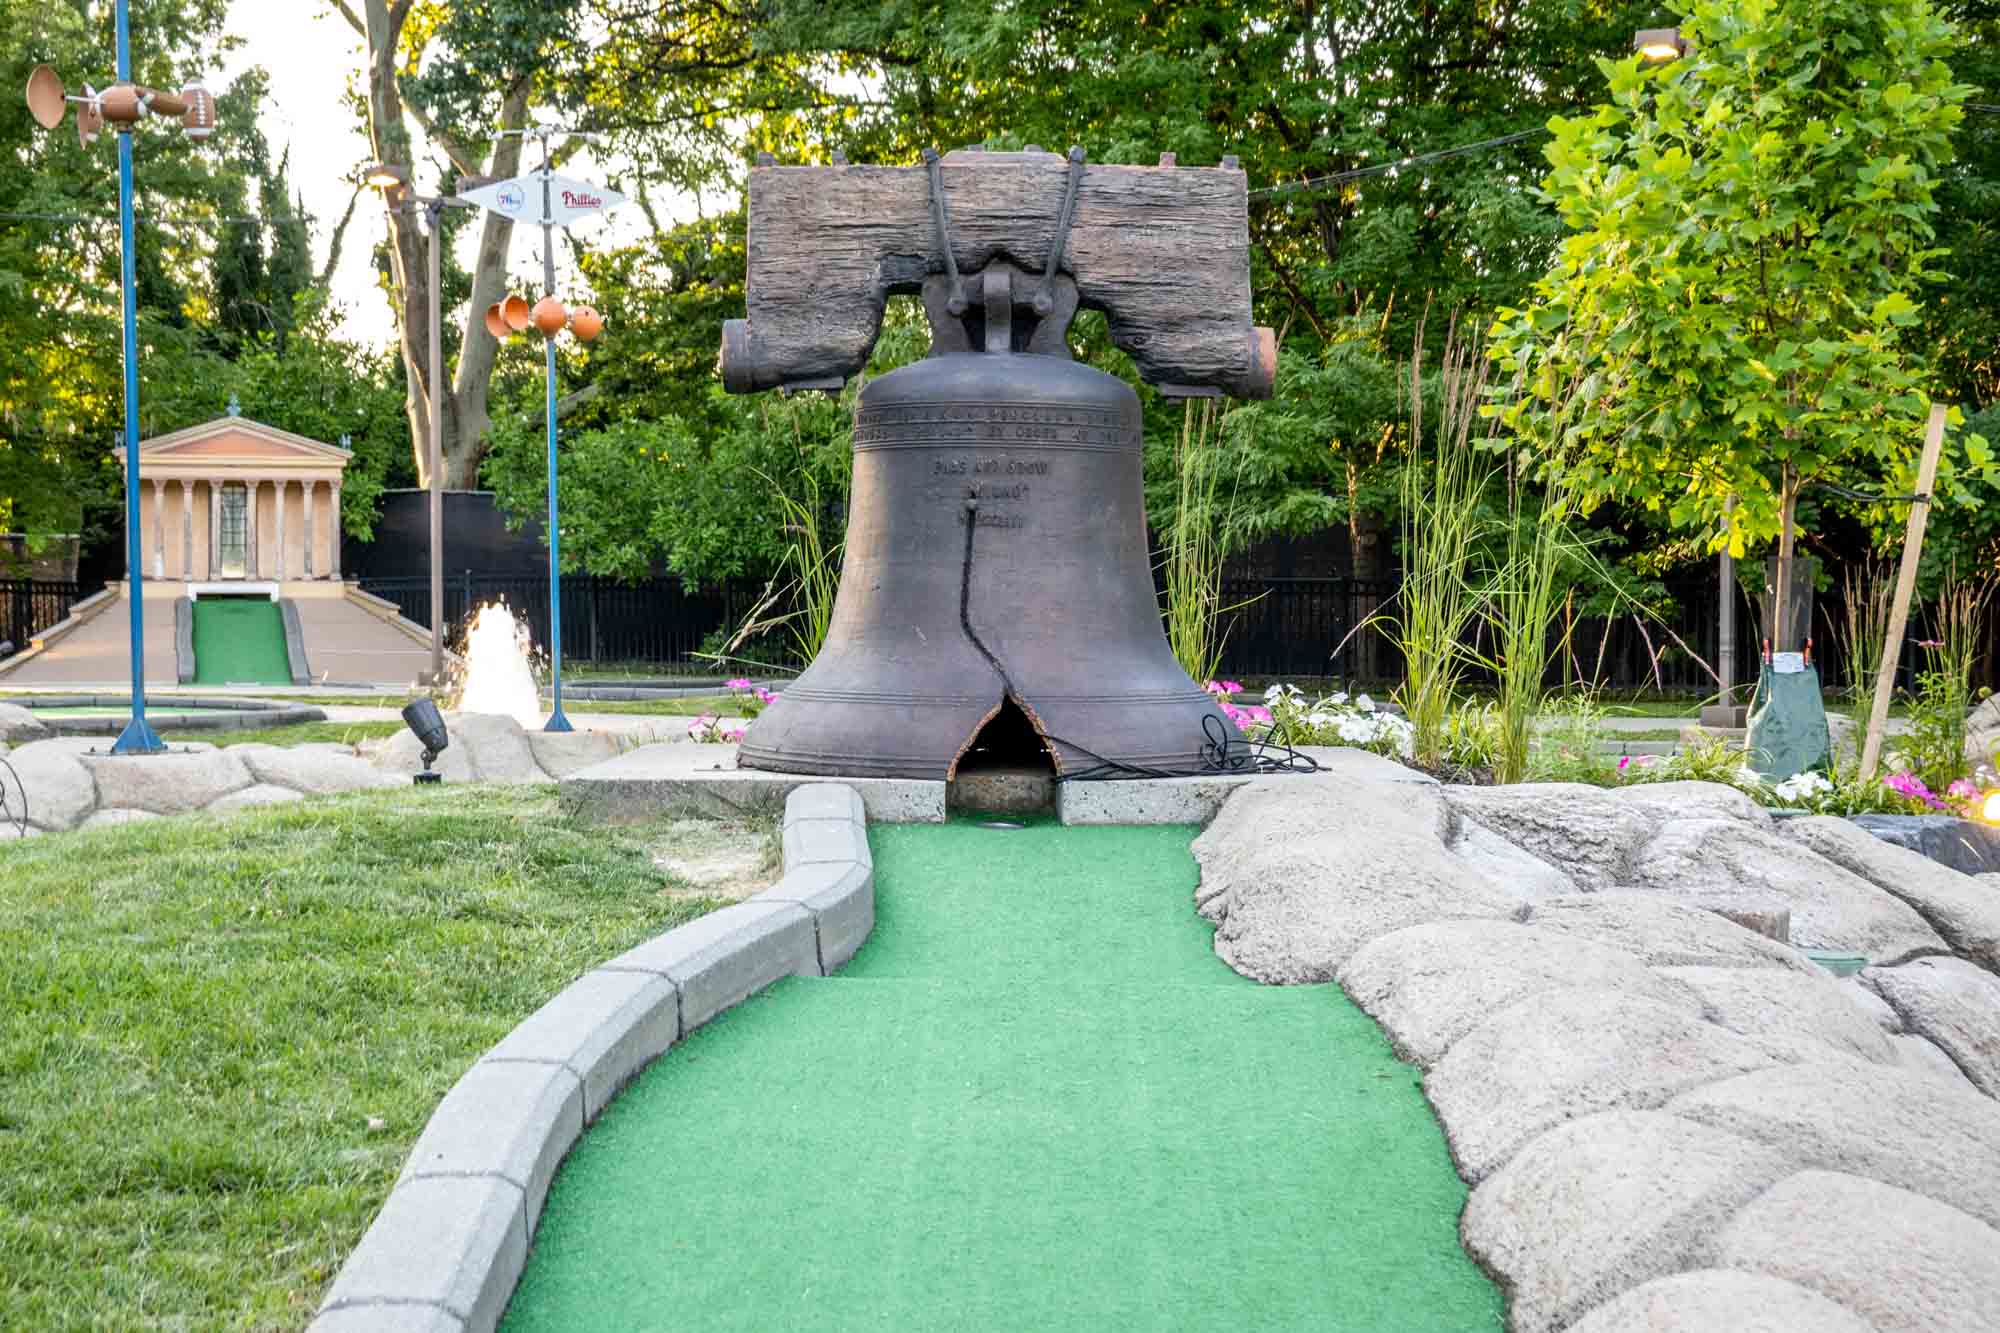 Mini-golf course inside Franklin Square with obstacles of The Liberty Bell and the art museum